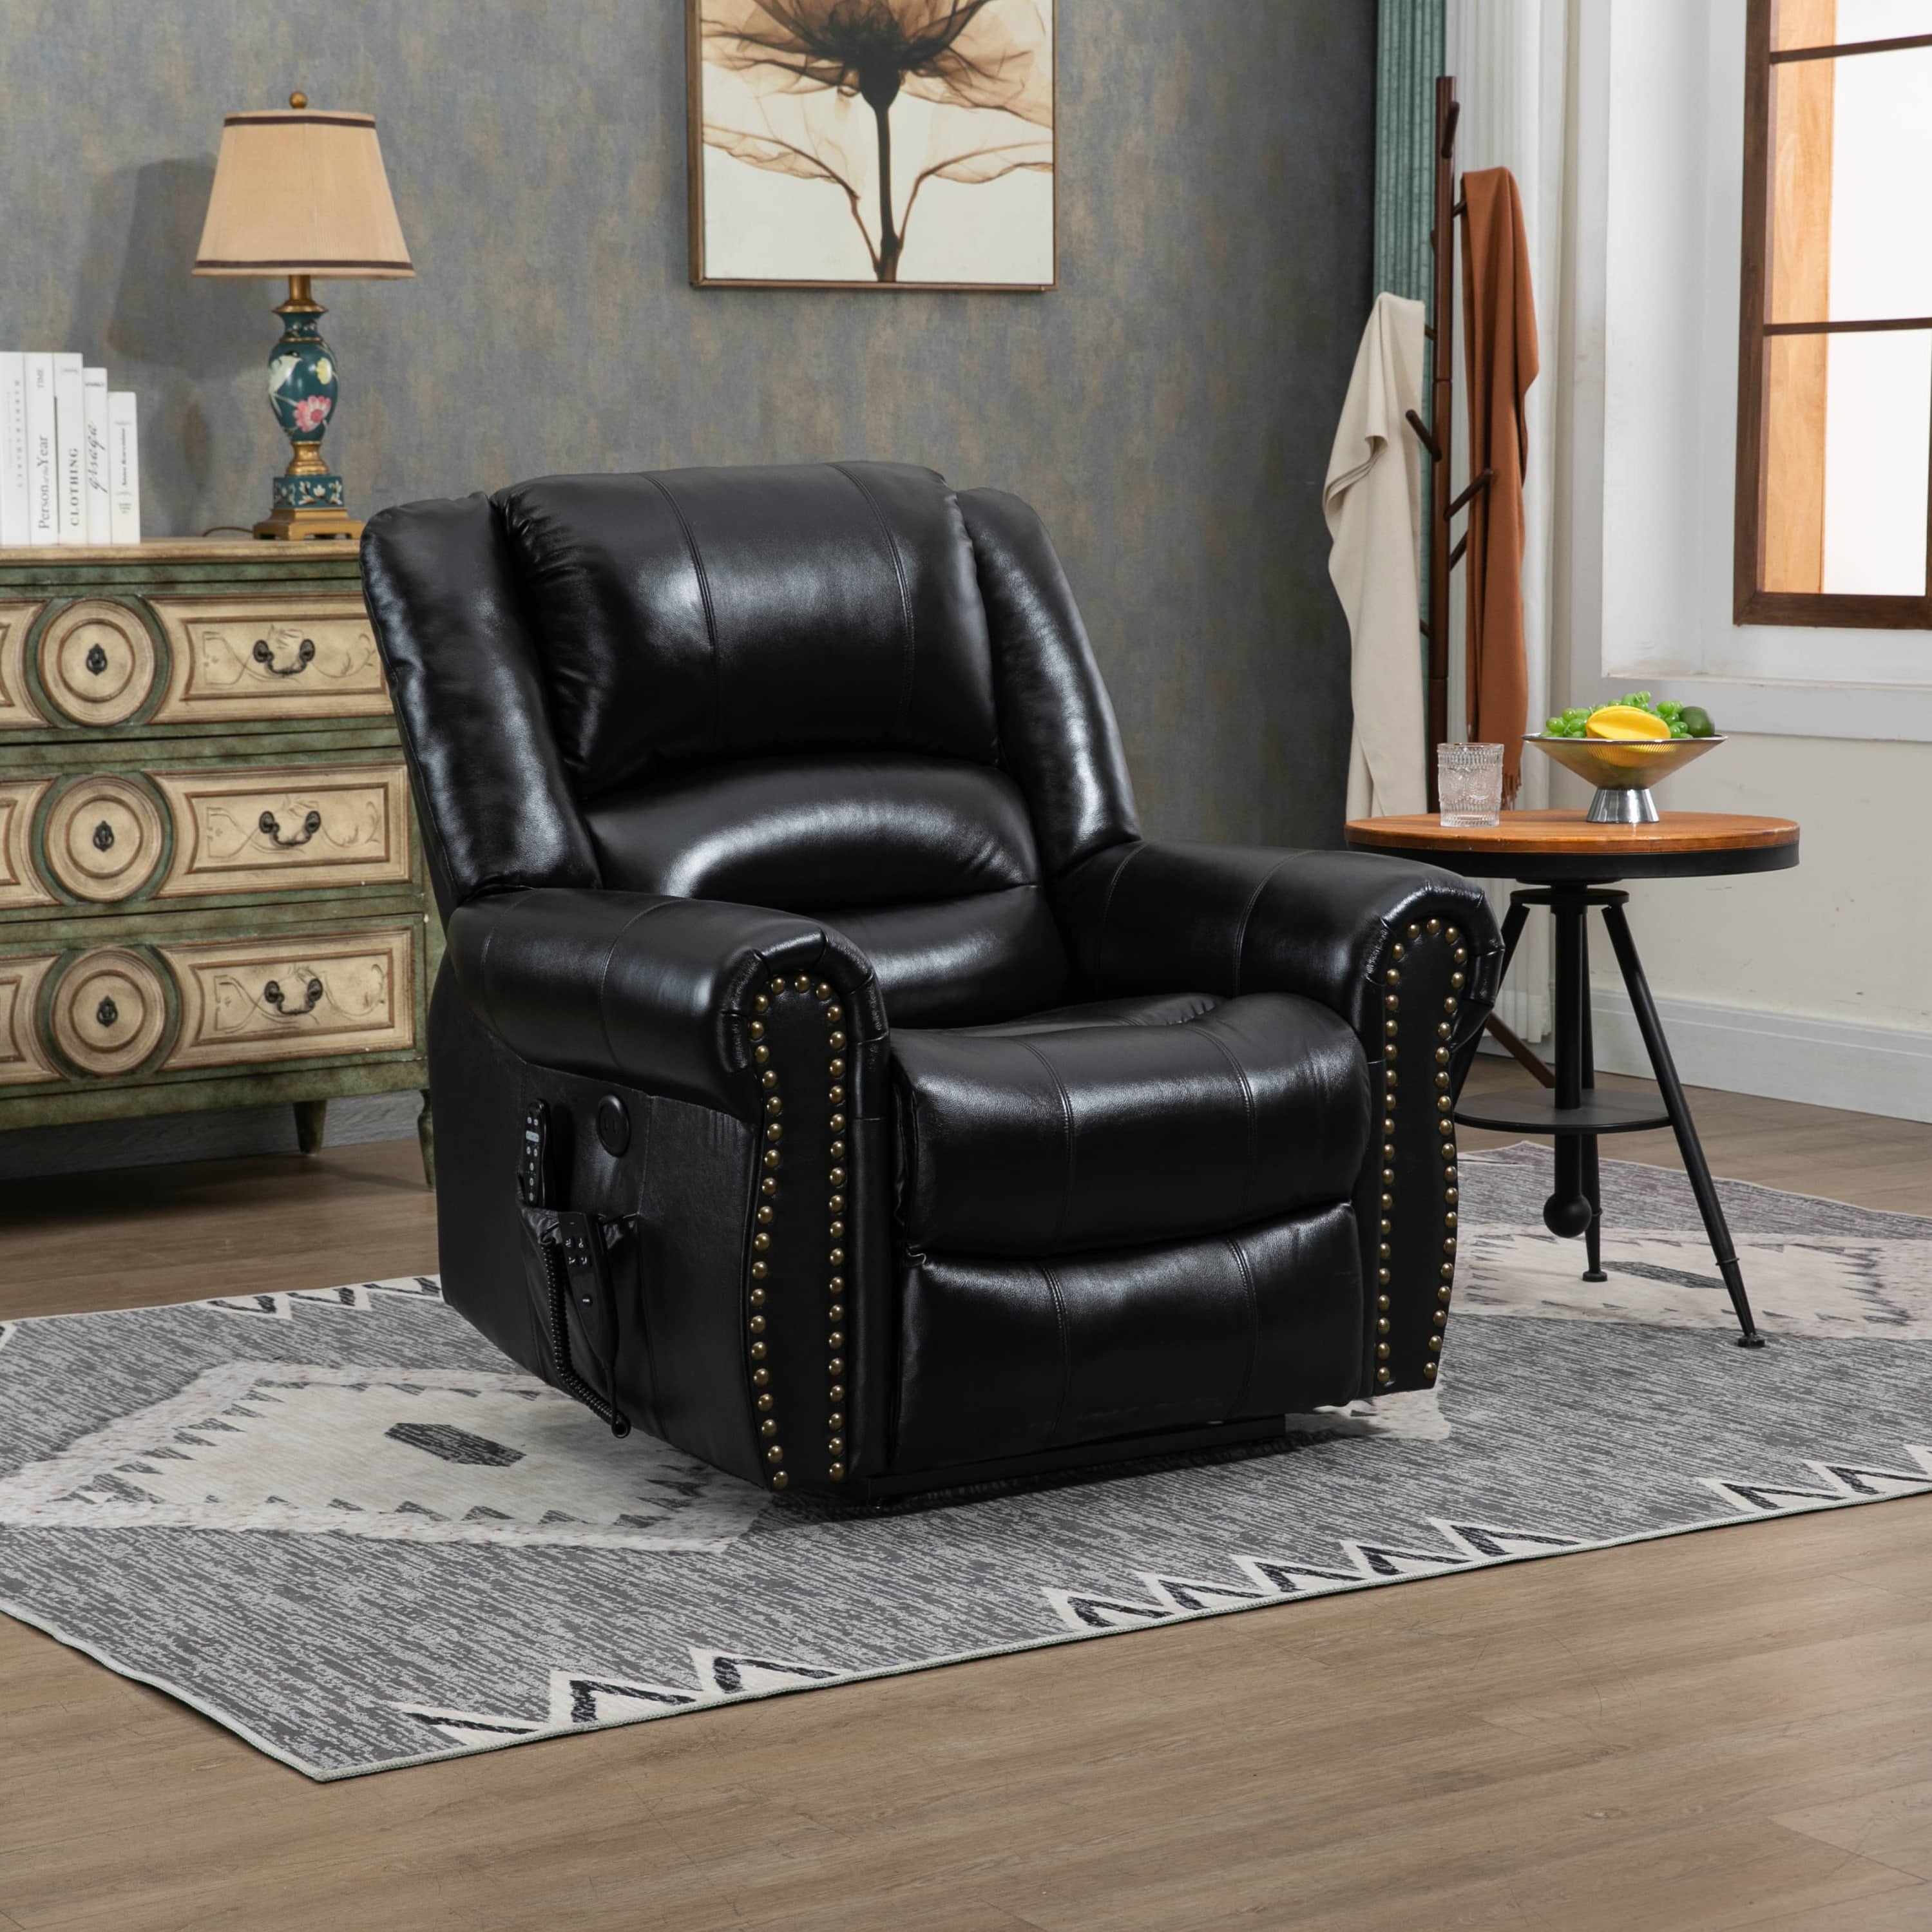 Genuine Leather Power Lift Recliner Chair with Heat, Massage and Infinite Positioning, Black